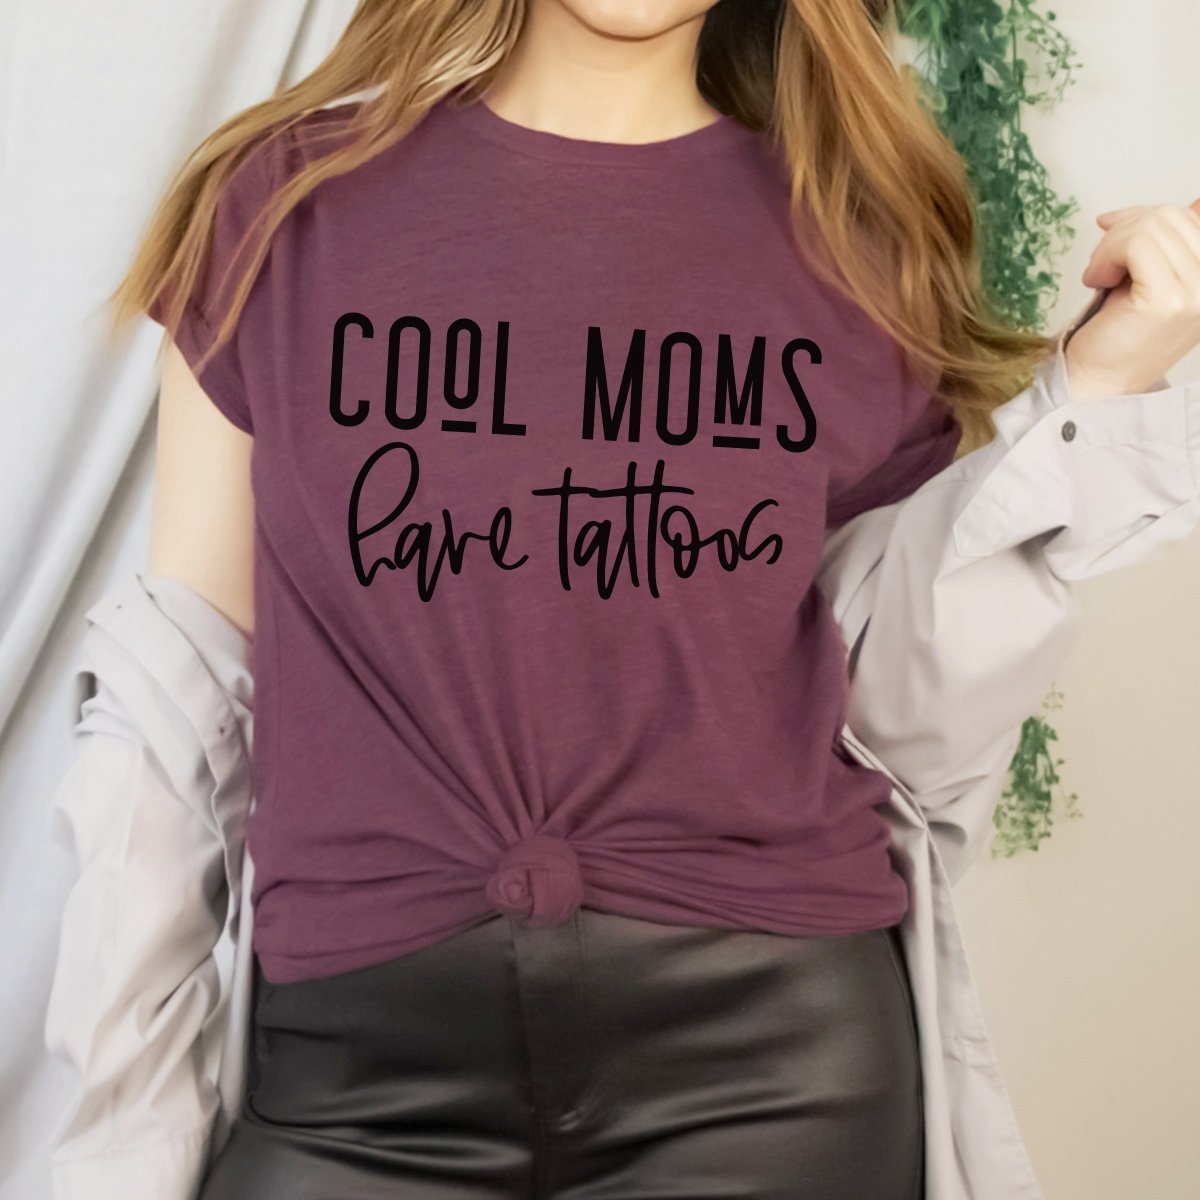 Cool Moms have tattoos Tee - Limeberry Designs